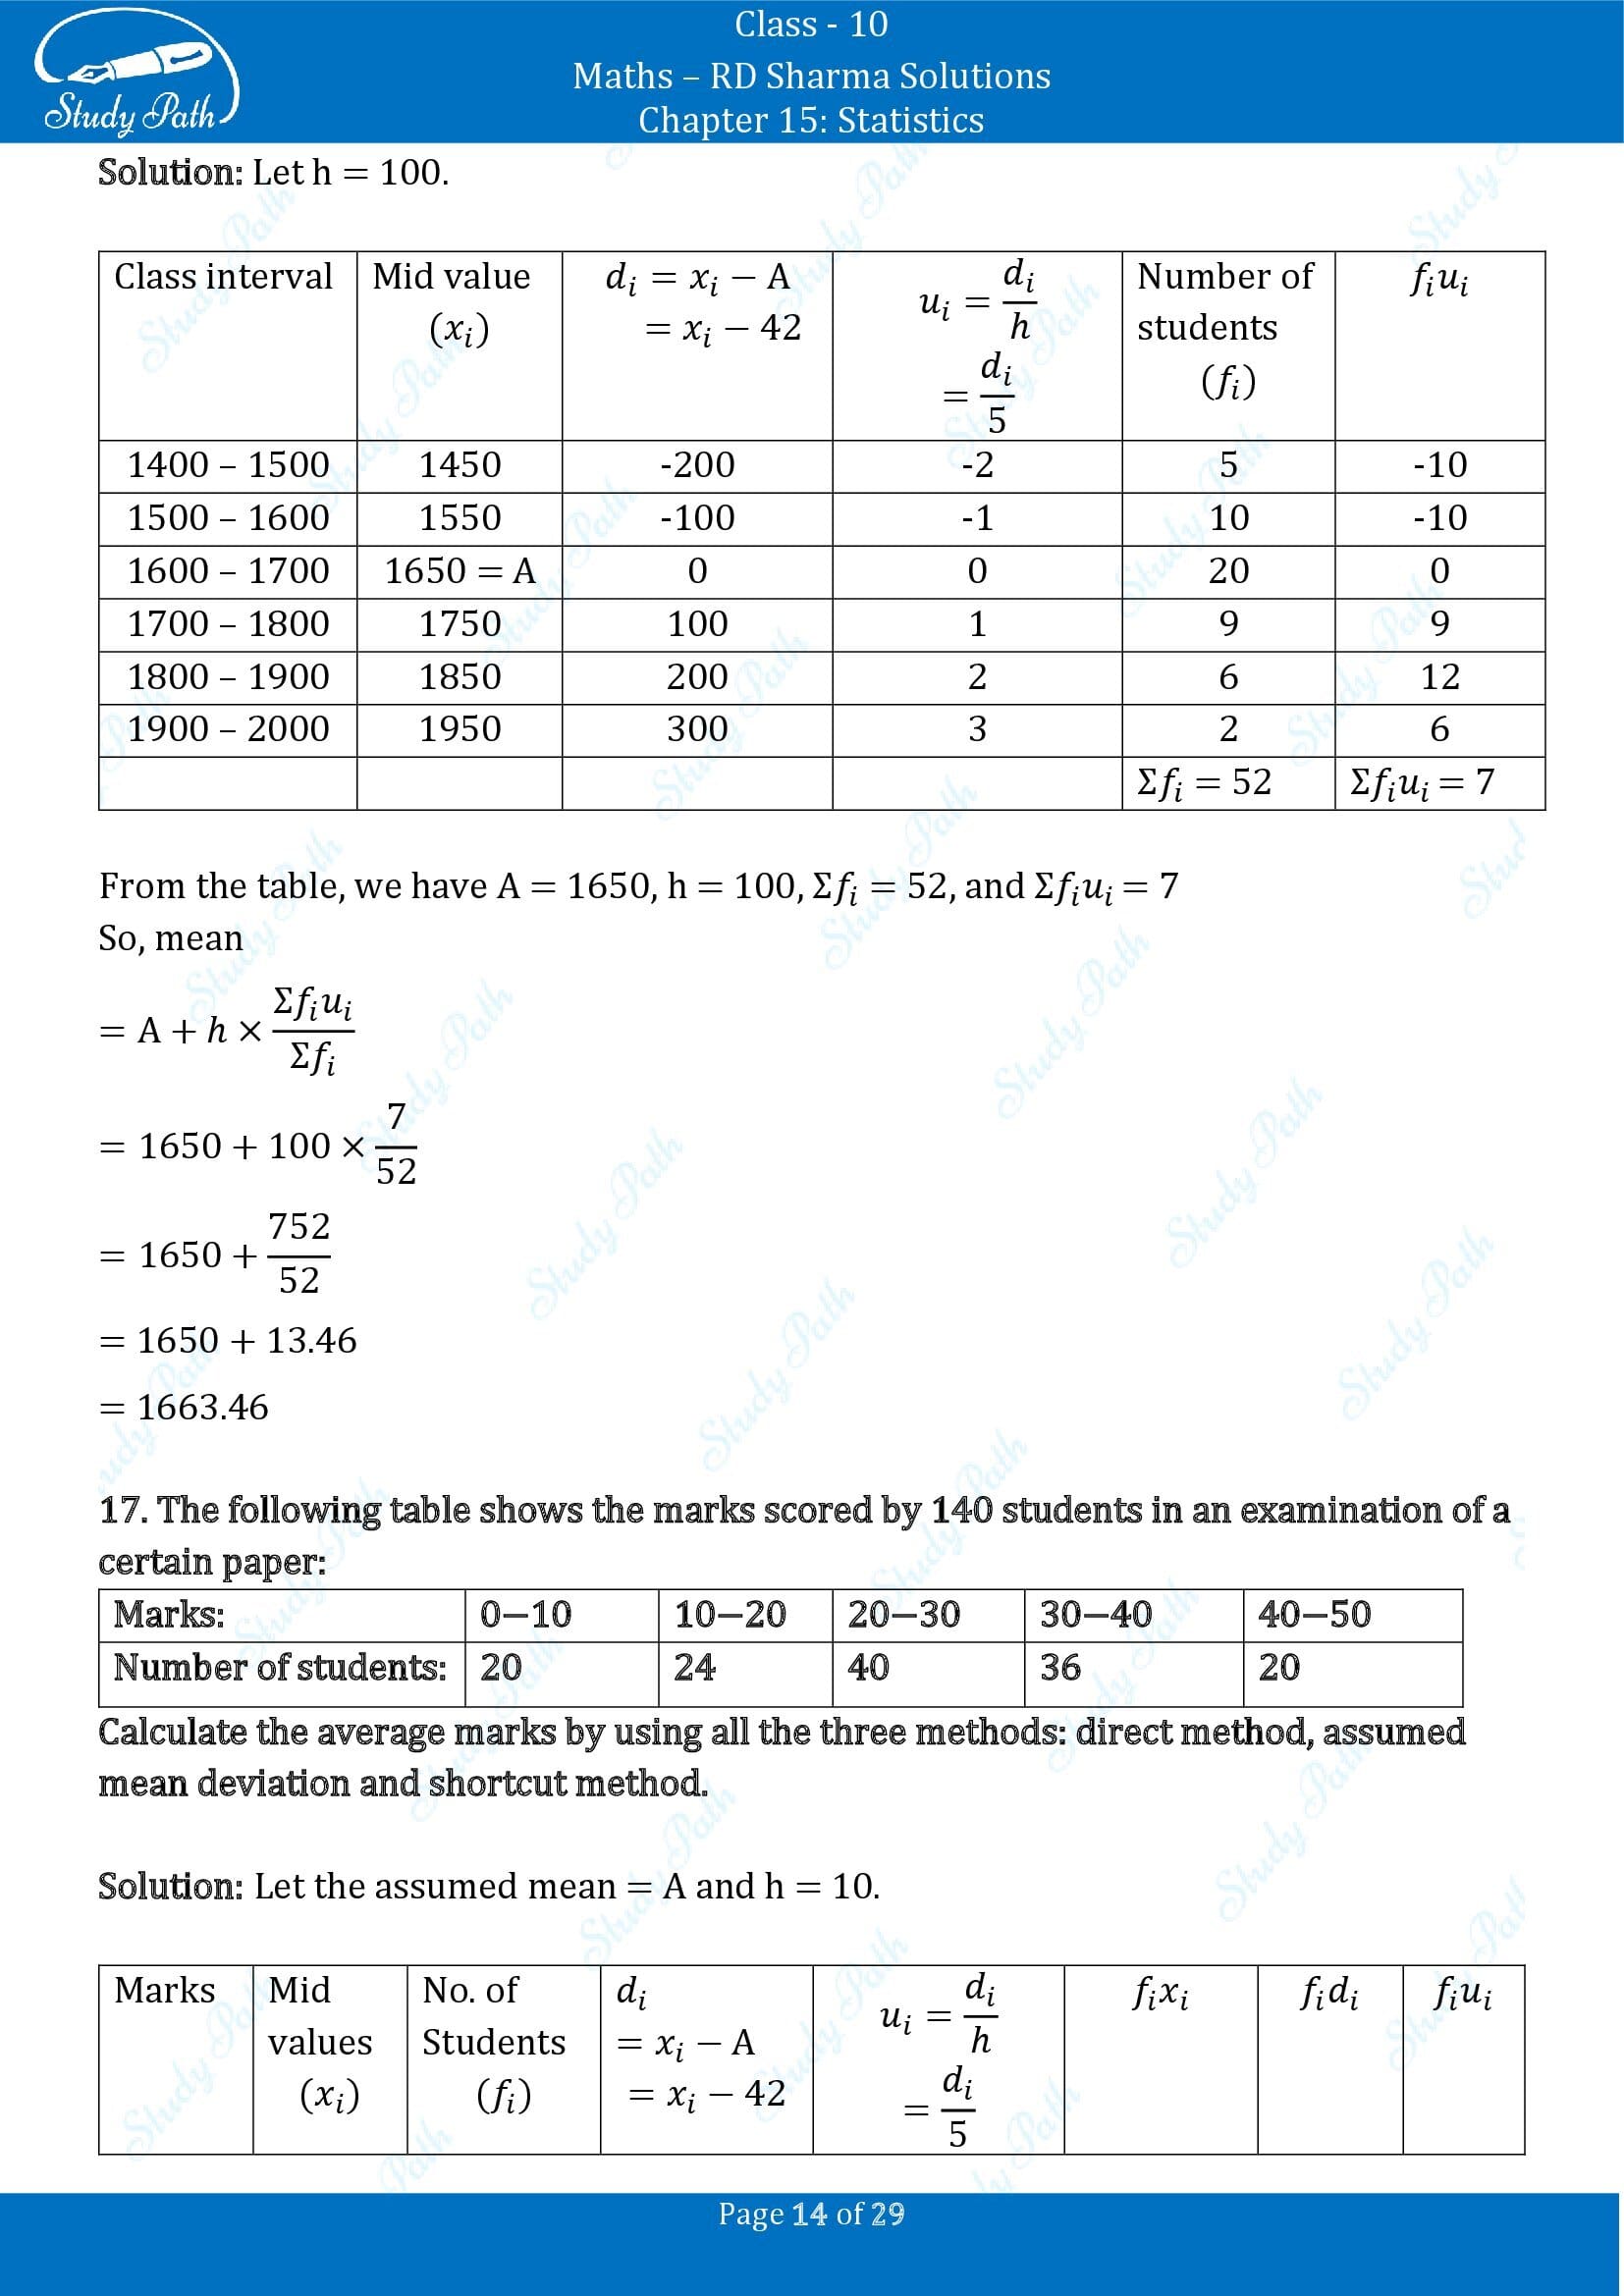 RD Sharma Solutions Class 10 Chapter 15 Statistics Exercise 15.3 0014